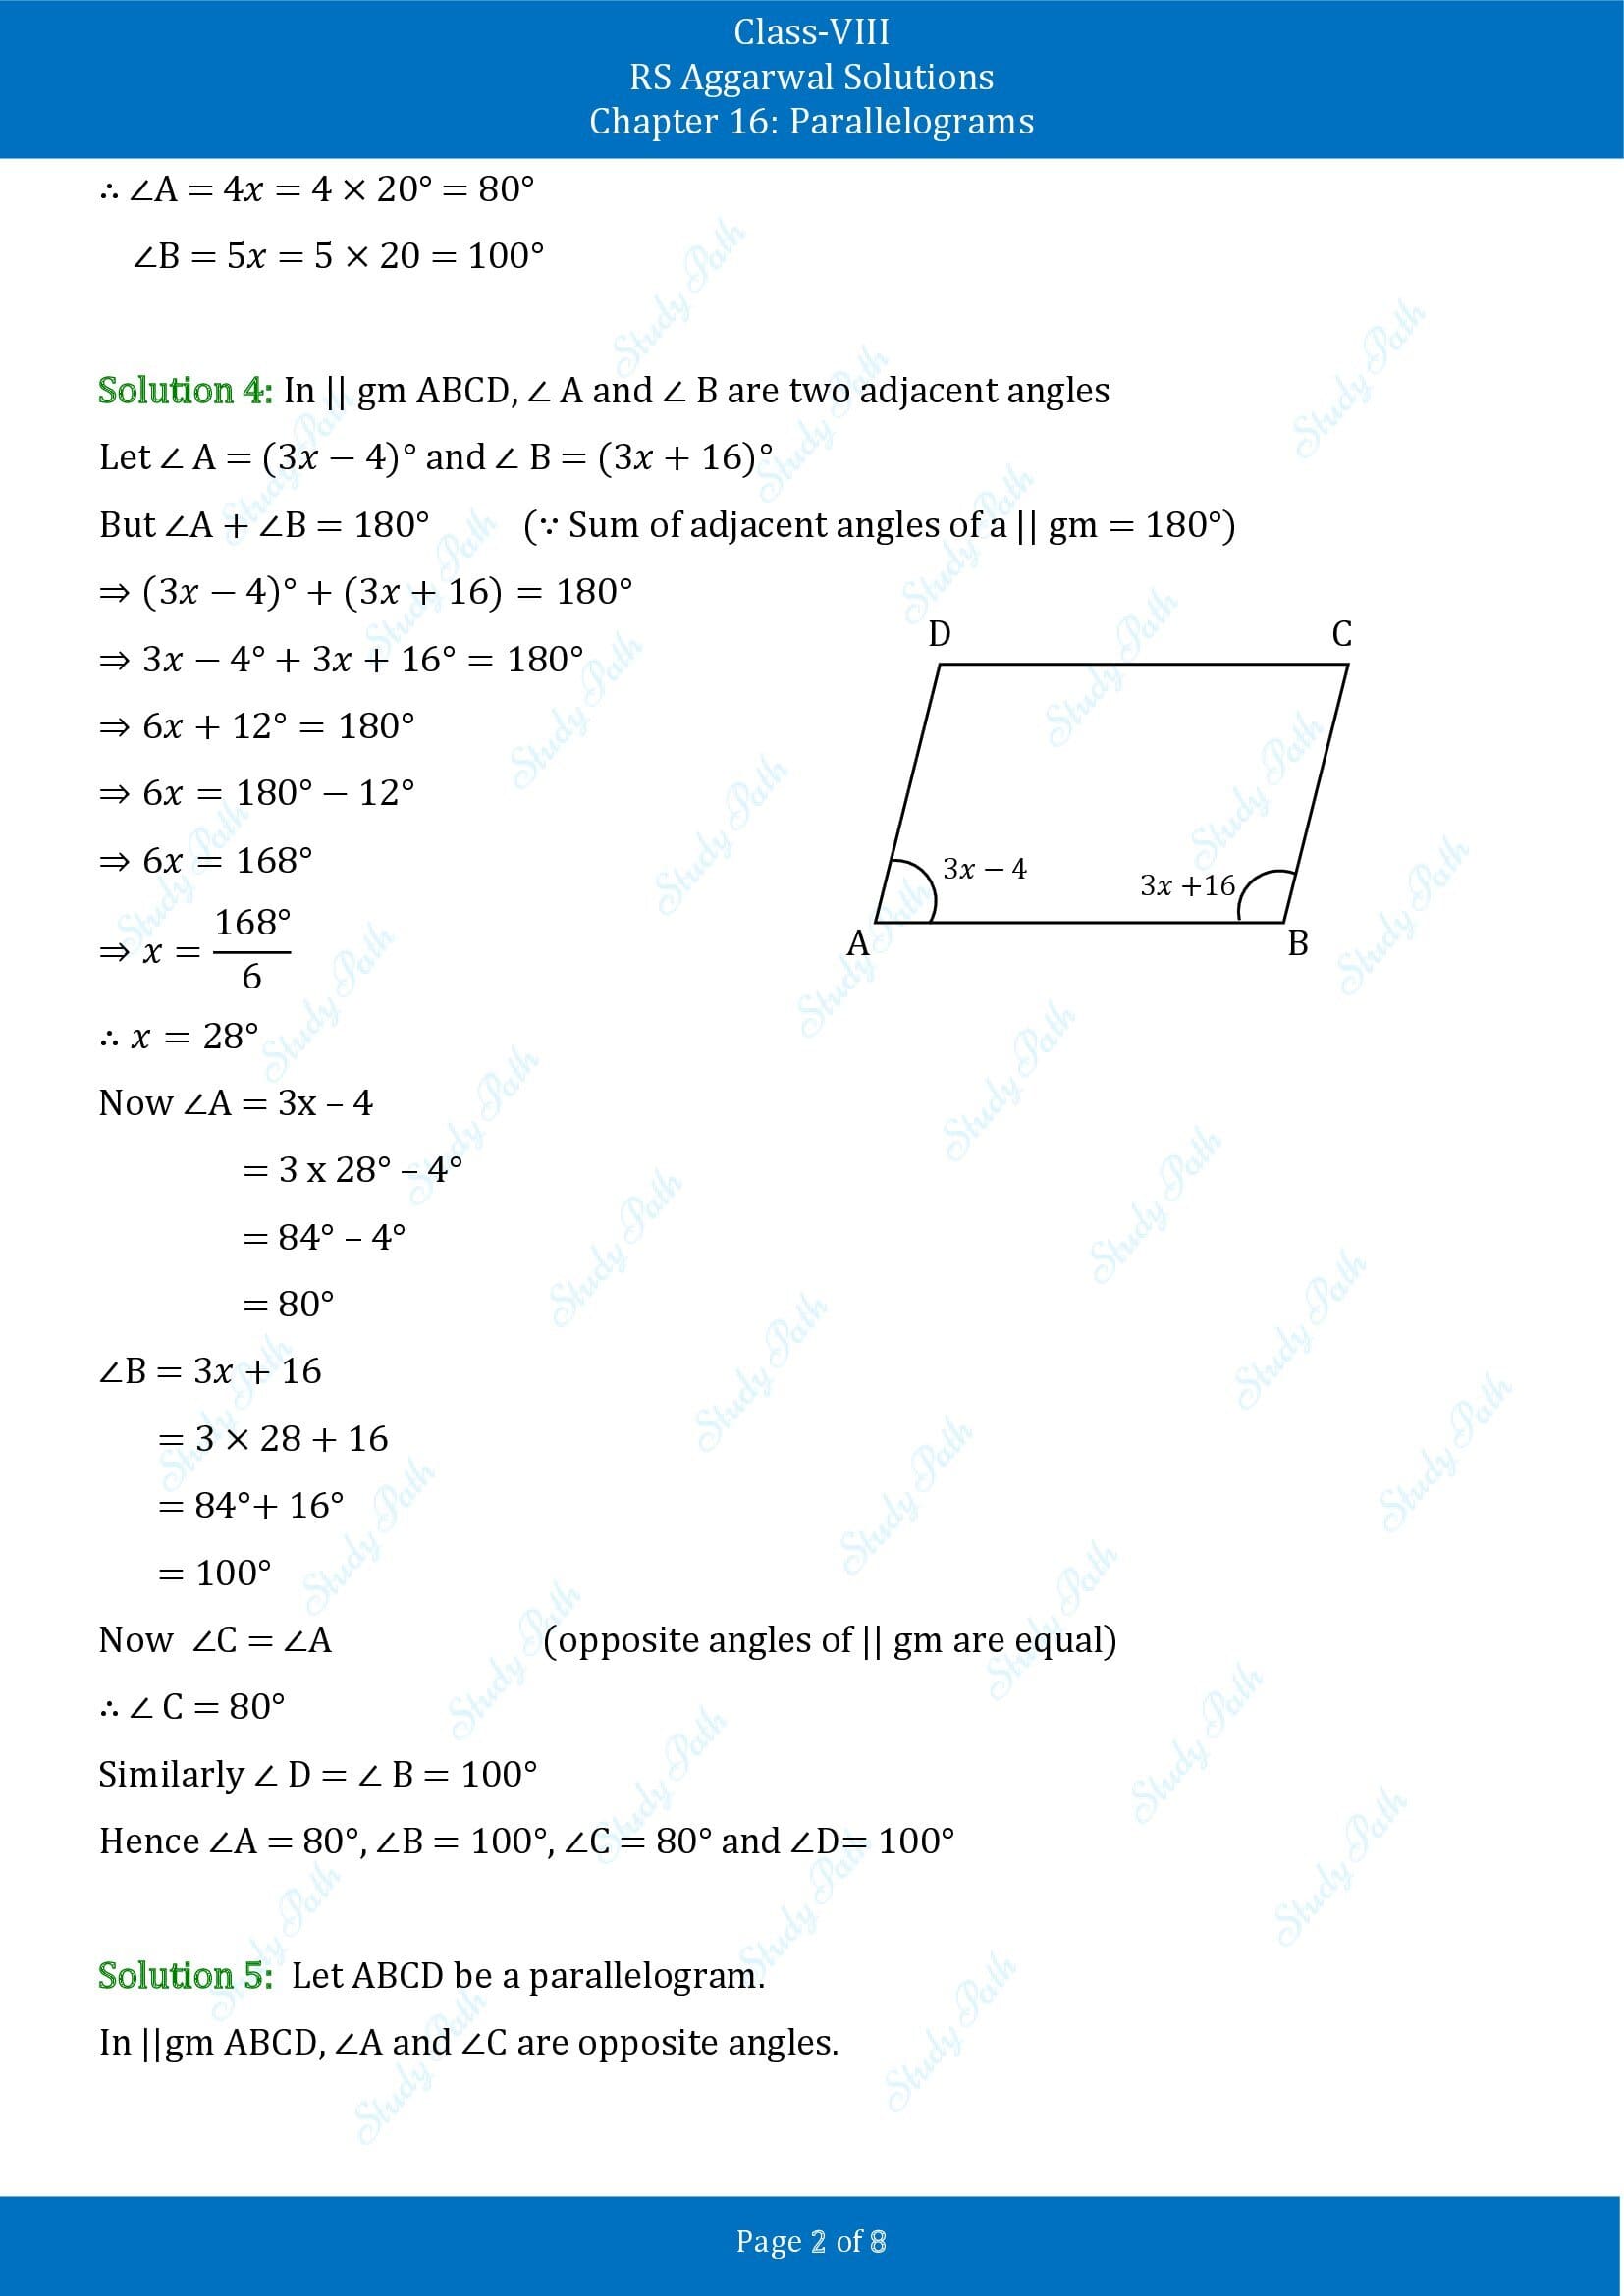 RS Aggarwal Solutions Class 8 Chapter 16 Parallelograms Exercise 16A 00002